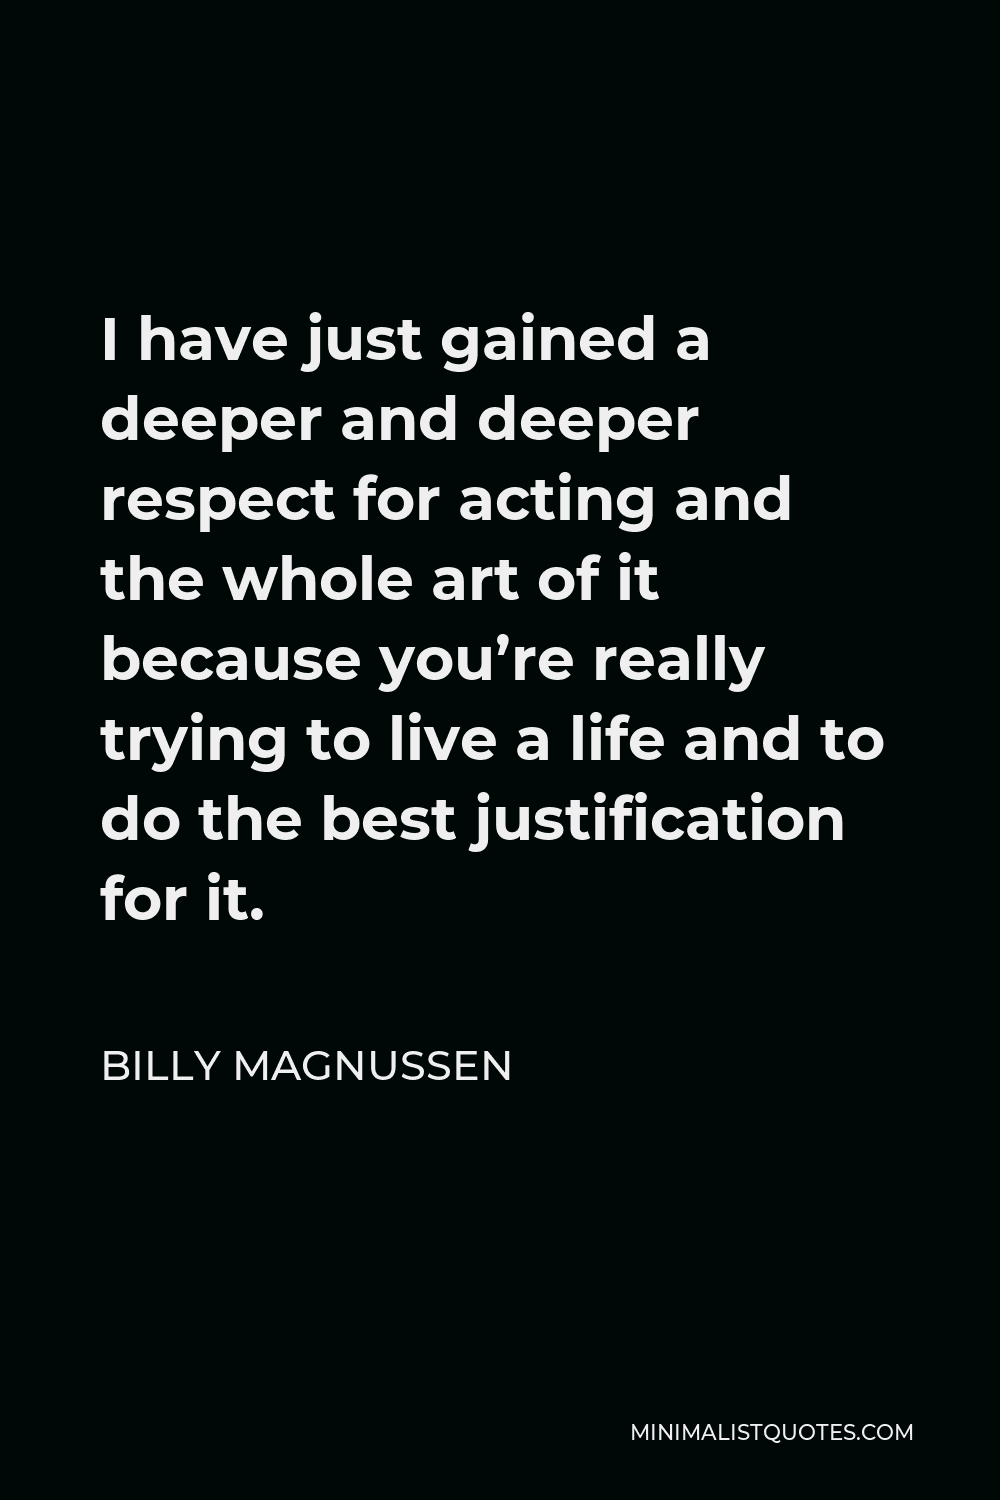 Billy Magnussen Quote - I have just gained a deeper and deeper respect for acting and the whole art of it because you’re really trying to live a life and to do the best justification for it.